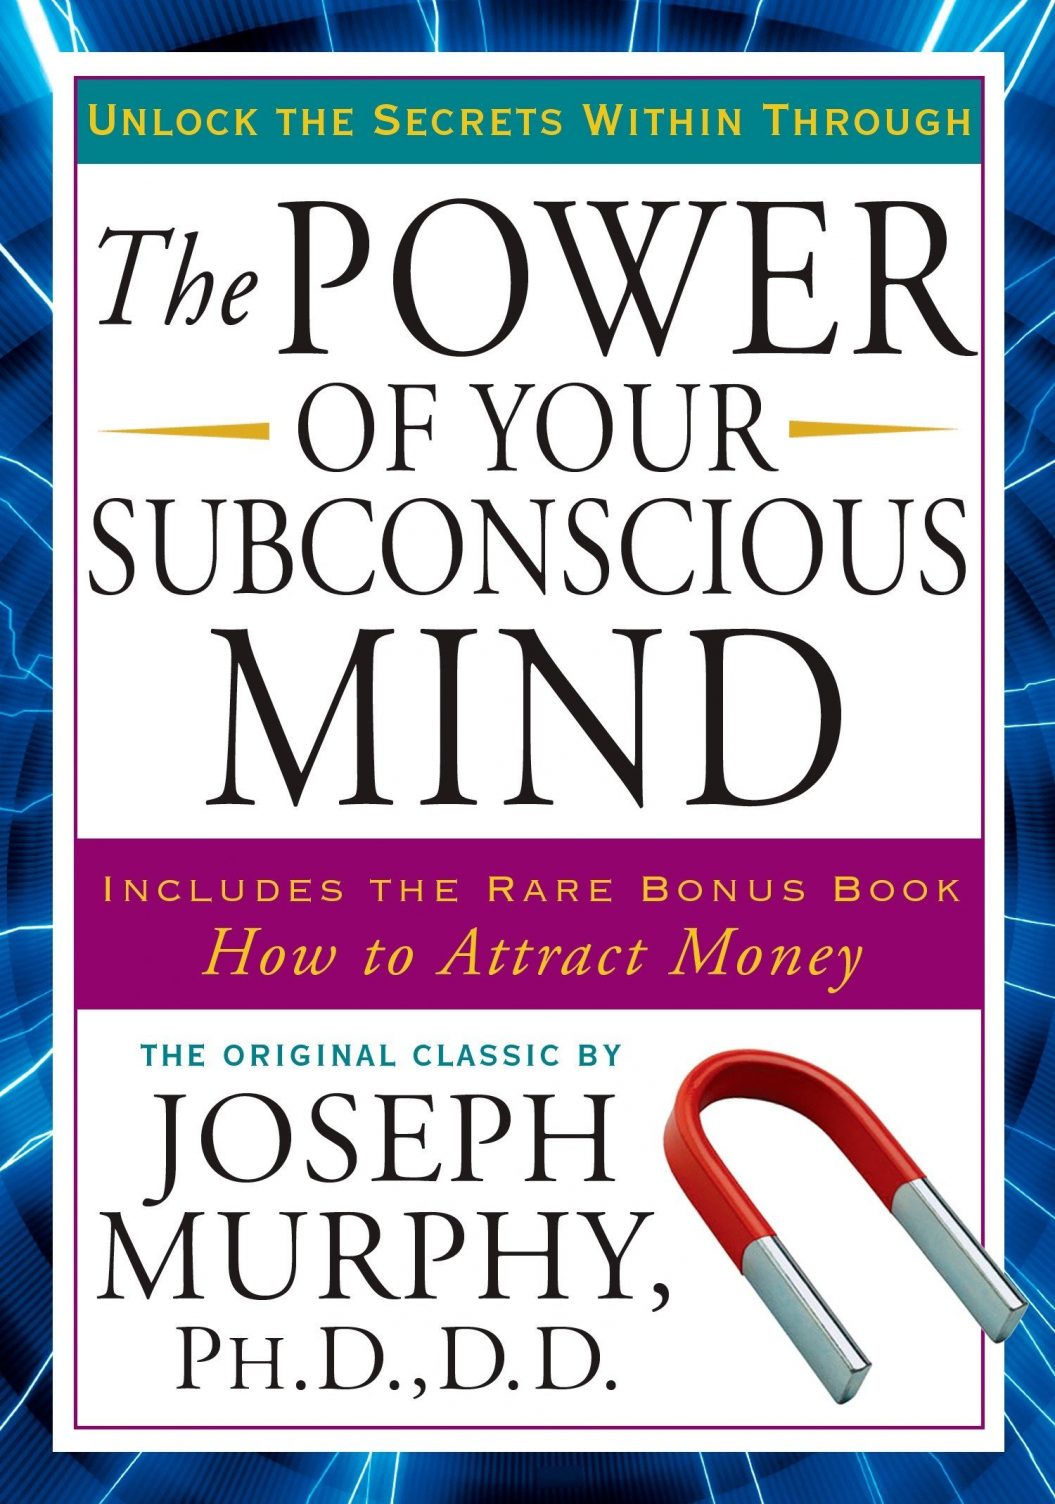 The Power of Your Subconscious Mind-By Joseph Murphy